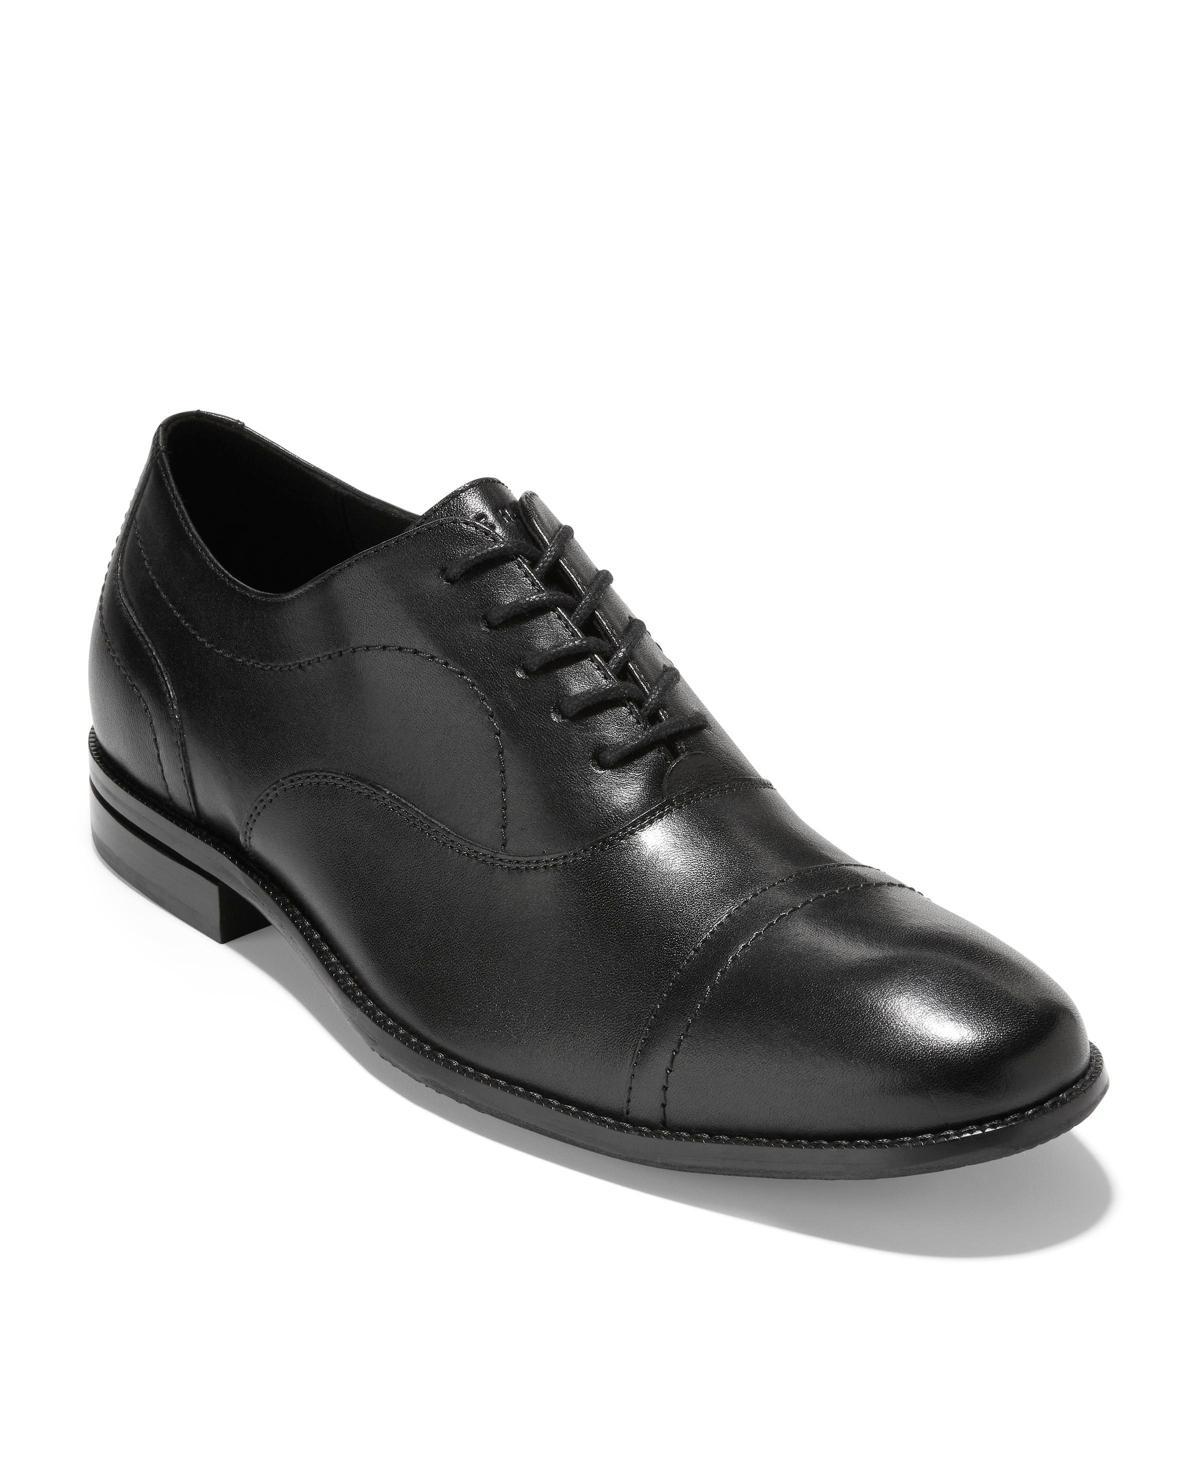 Cole Haan Sawyer Oxford Dress Shoes Product Image